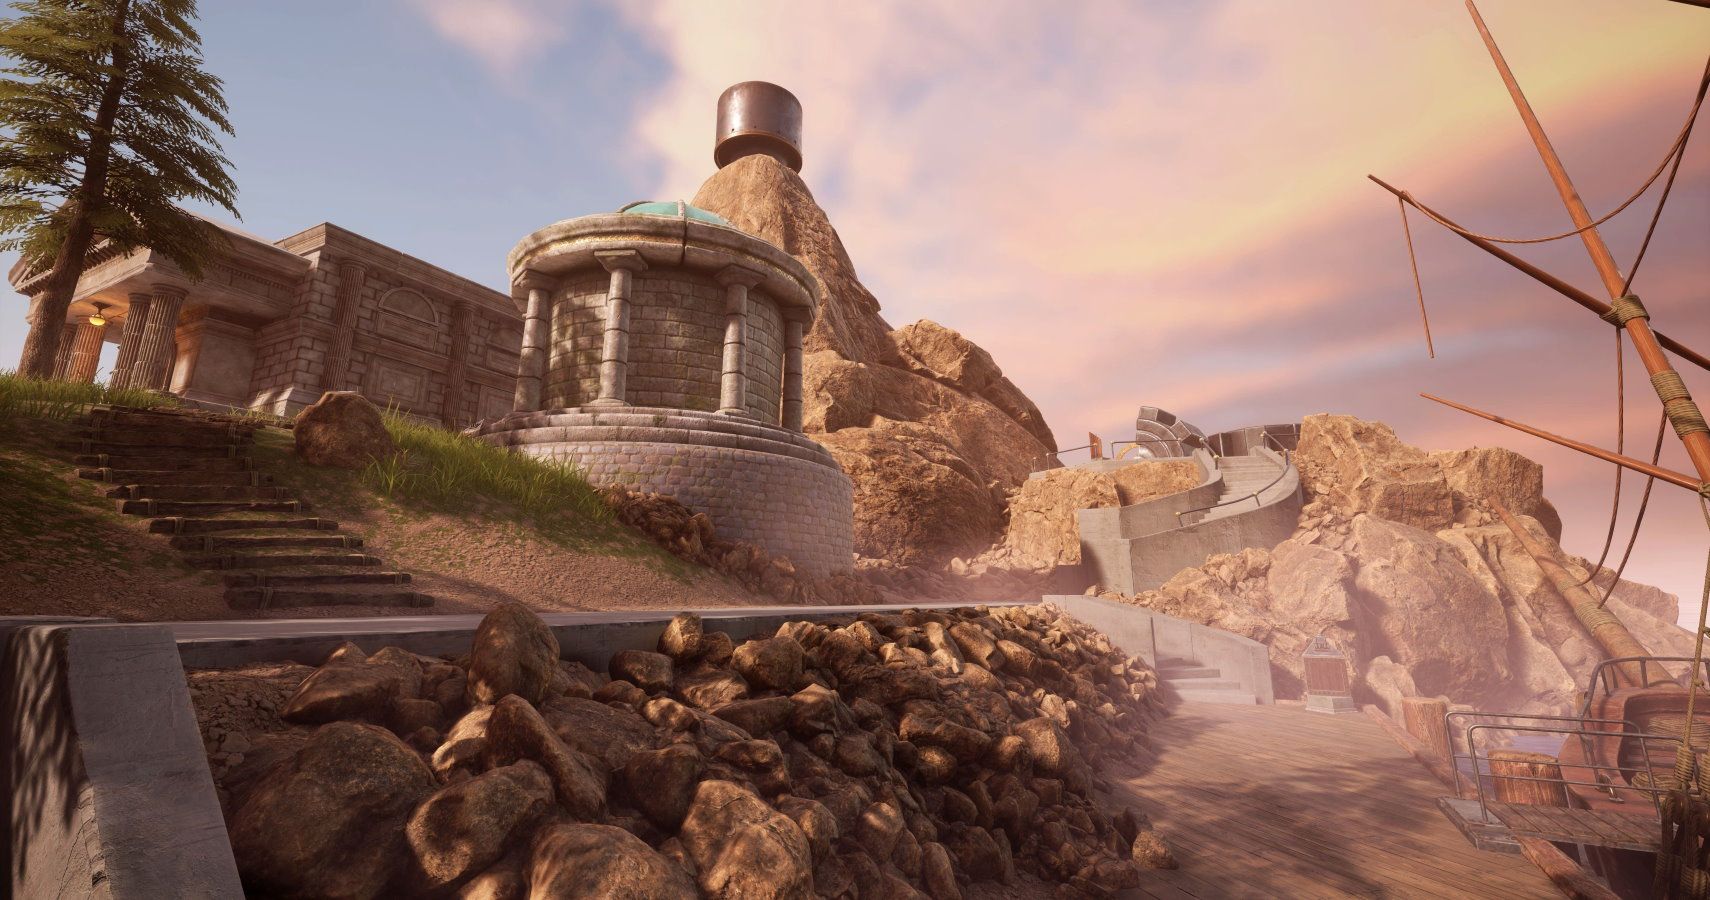 coop myst steam game castle two player